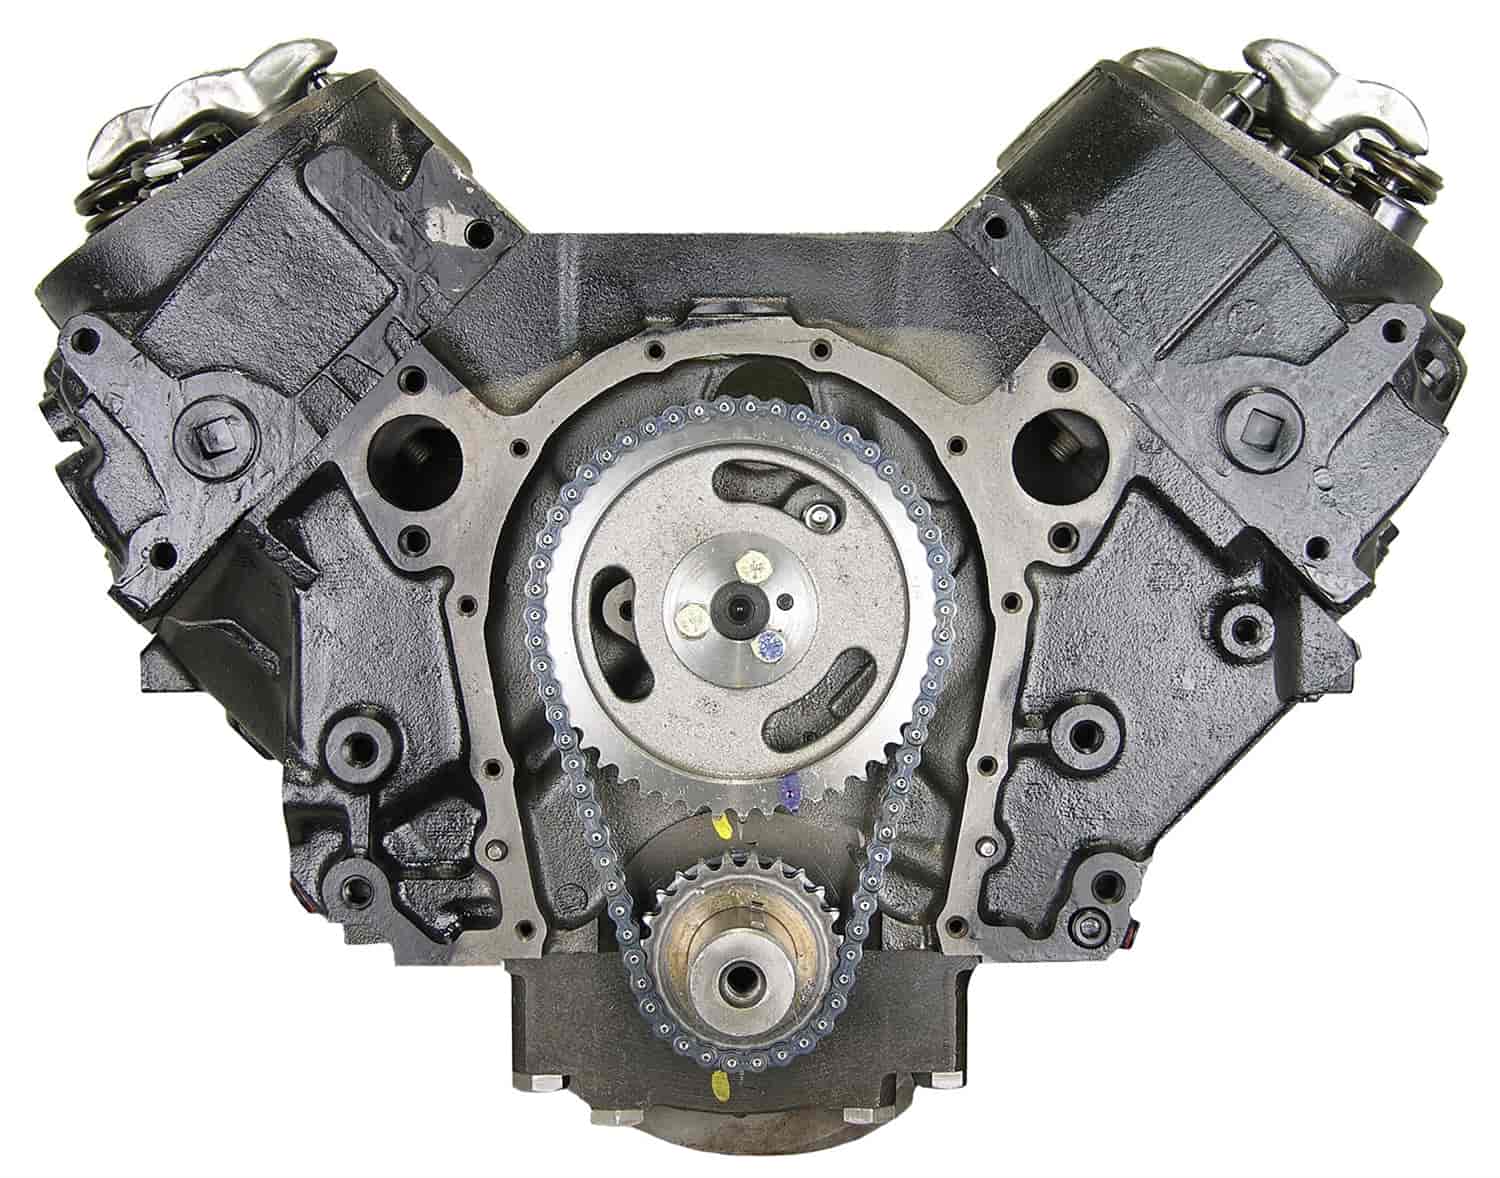 Remanufactured Crate Engine for Marine Applications with 1973-1990 Big Block Chevy 454ci/7.4L